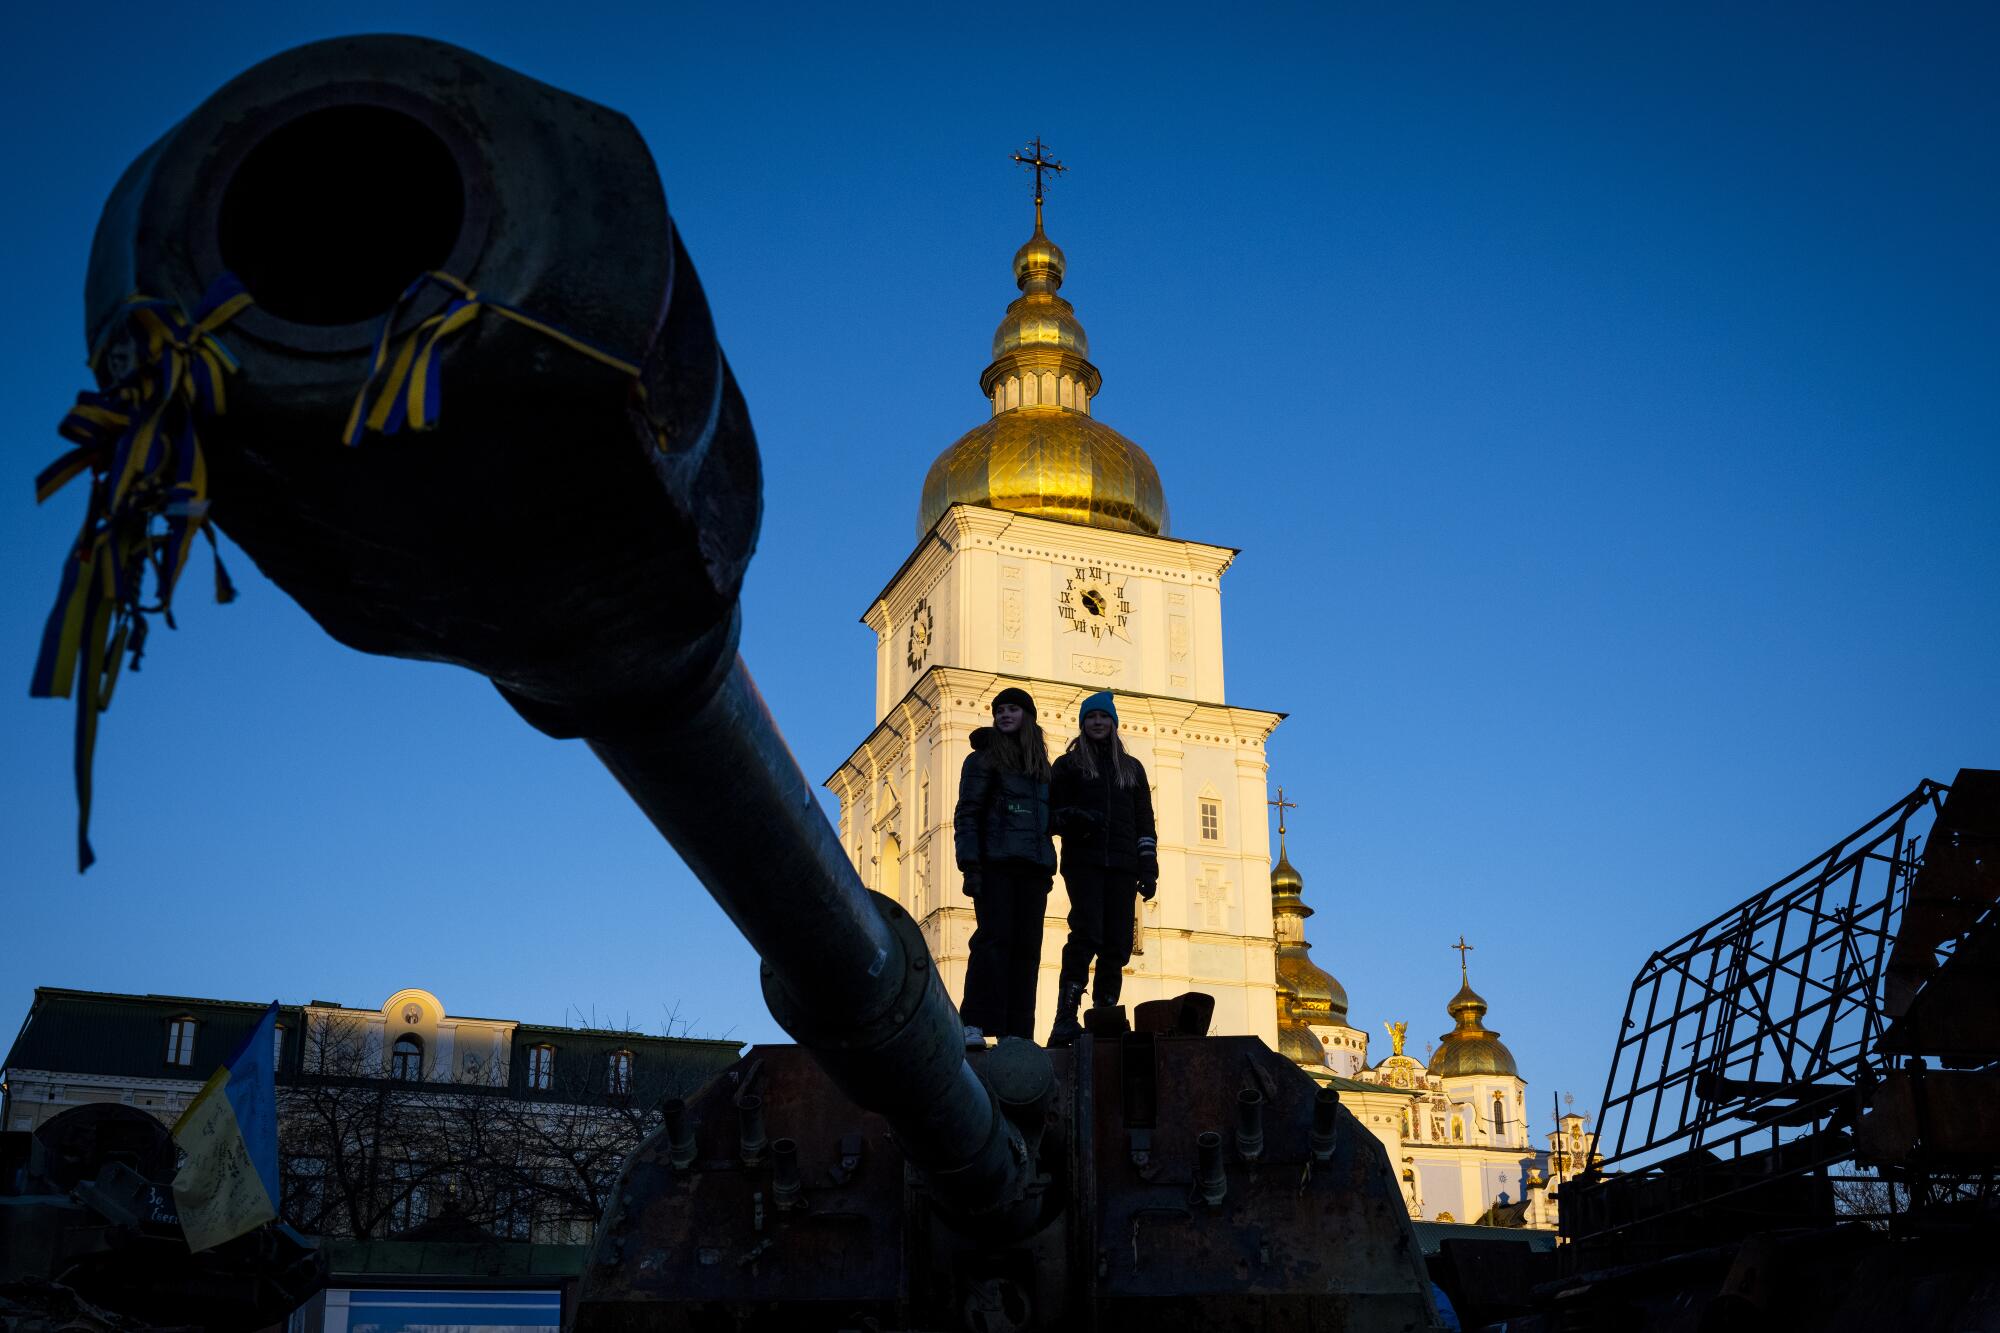 People stand in shadow near a tank displayed in Kyiv. A gold-domed monastery is lighted up in the background